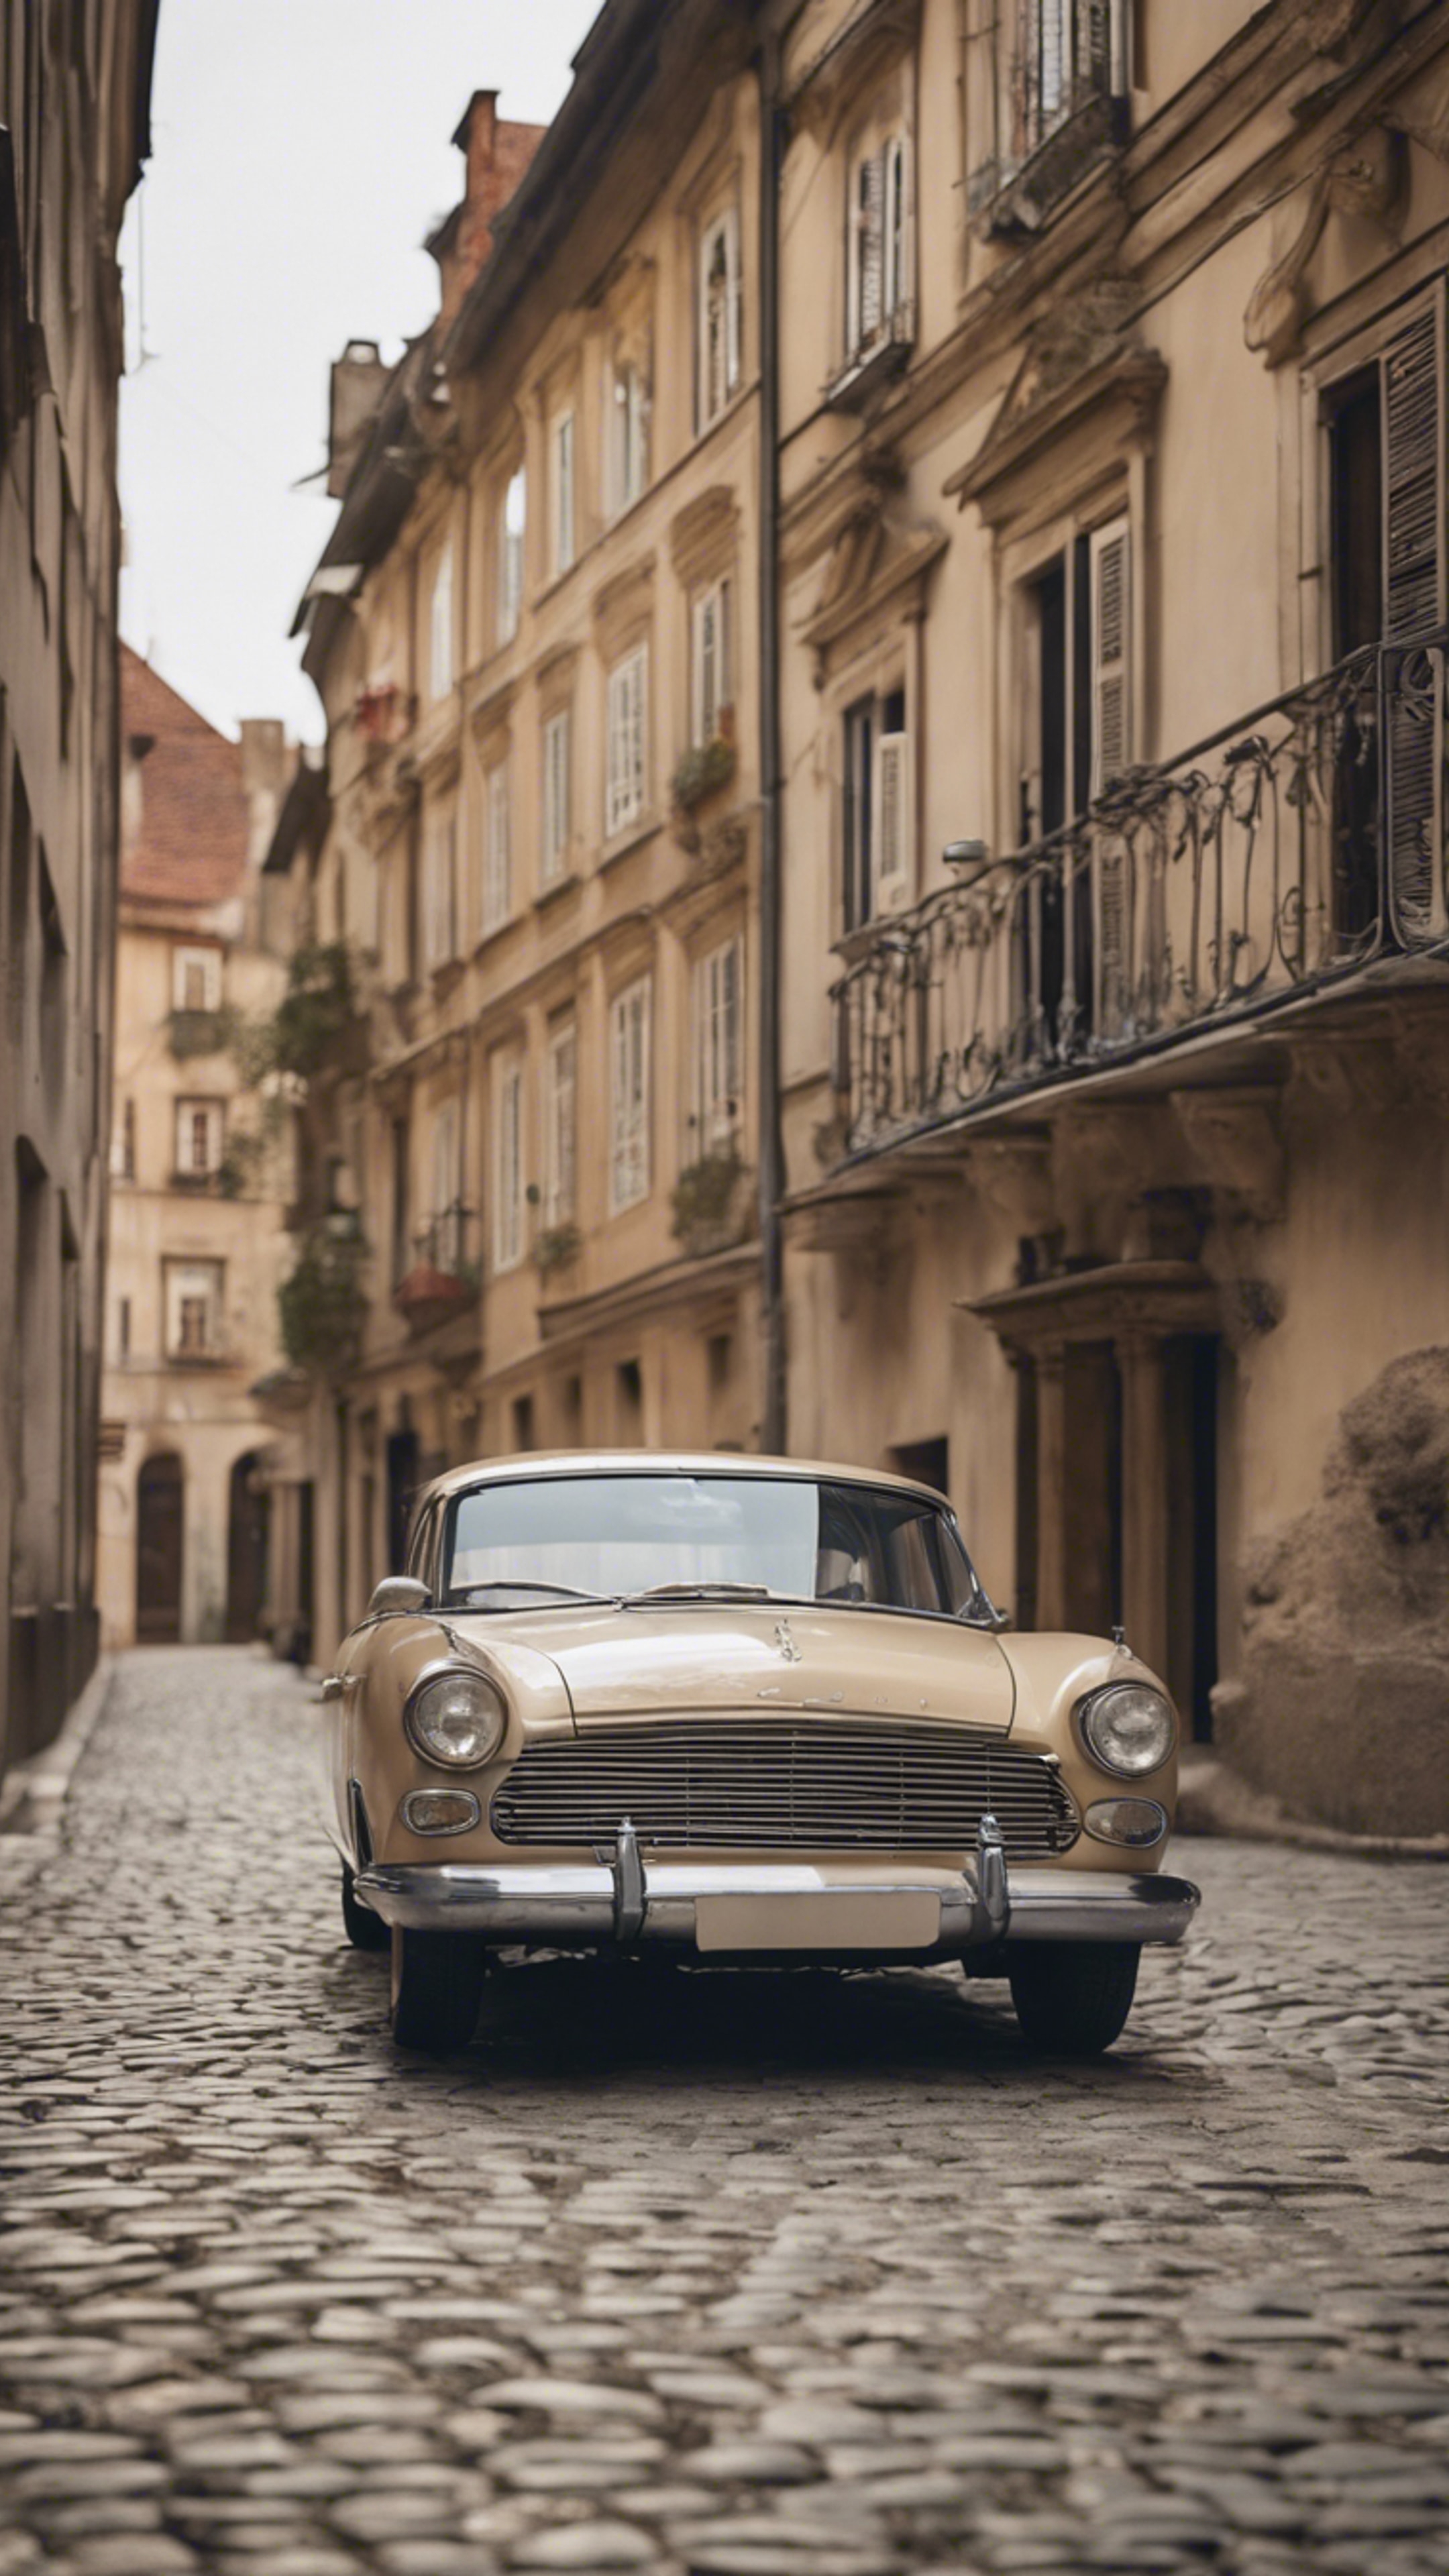 A beige classic car parked on a cobblestone street with rustic buildings in the background. Tapet[31a873a8b96b4be69c6a]